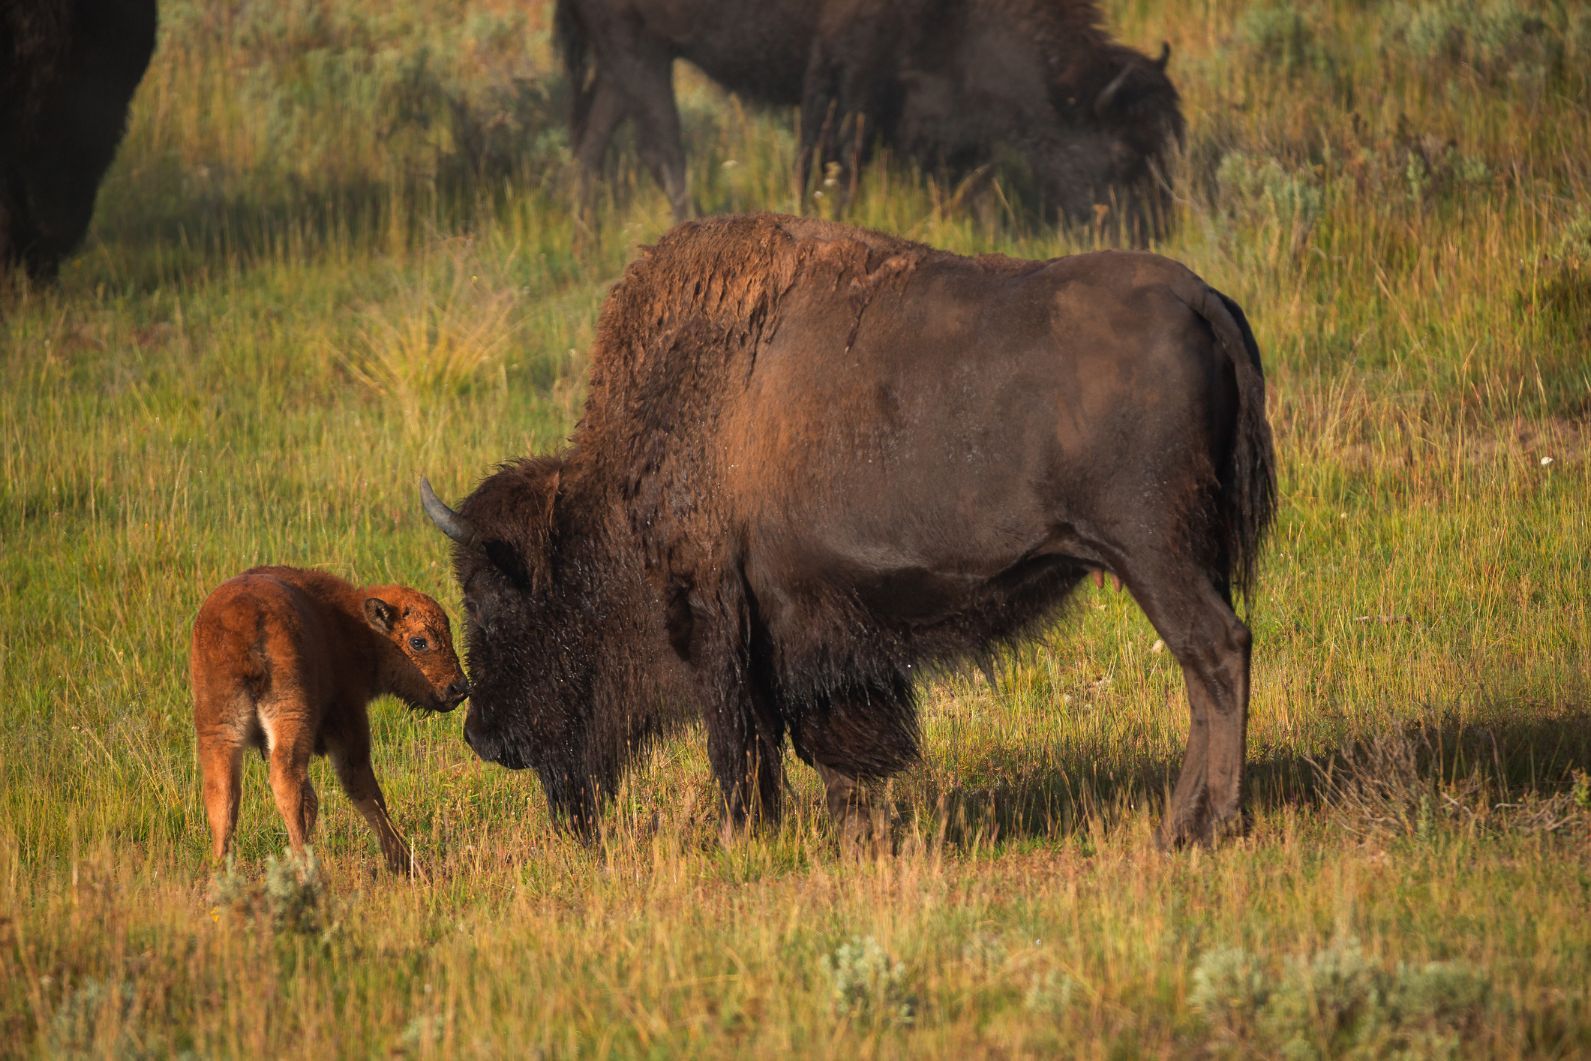 A baby bison has arrived on the scene in Kent, were bison were reintroduced to boost biodiversity. Photo: Getty